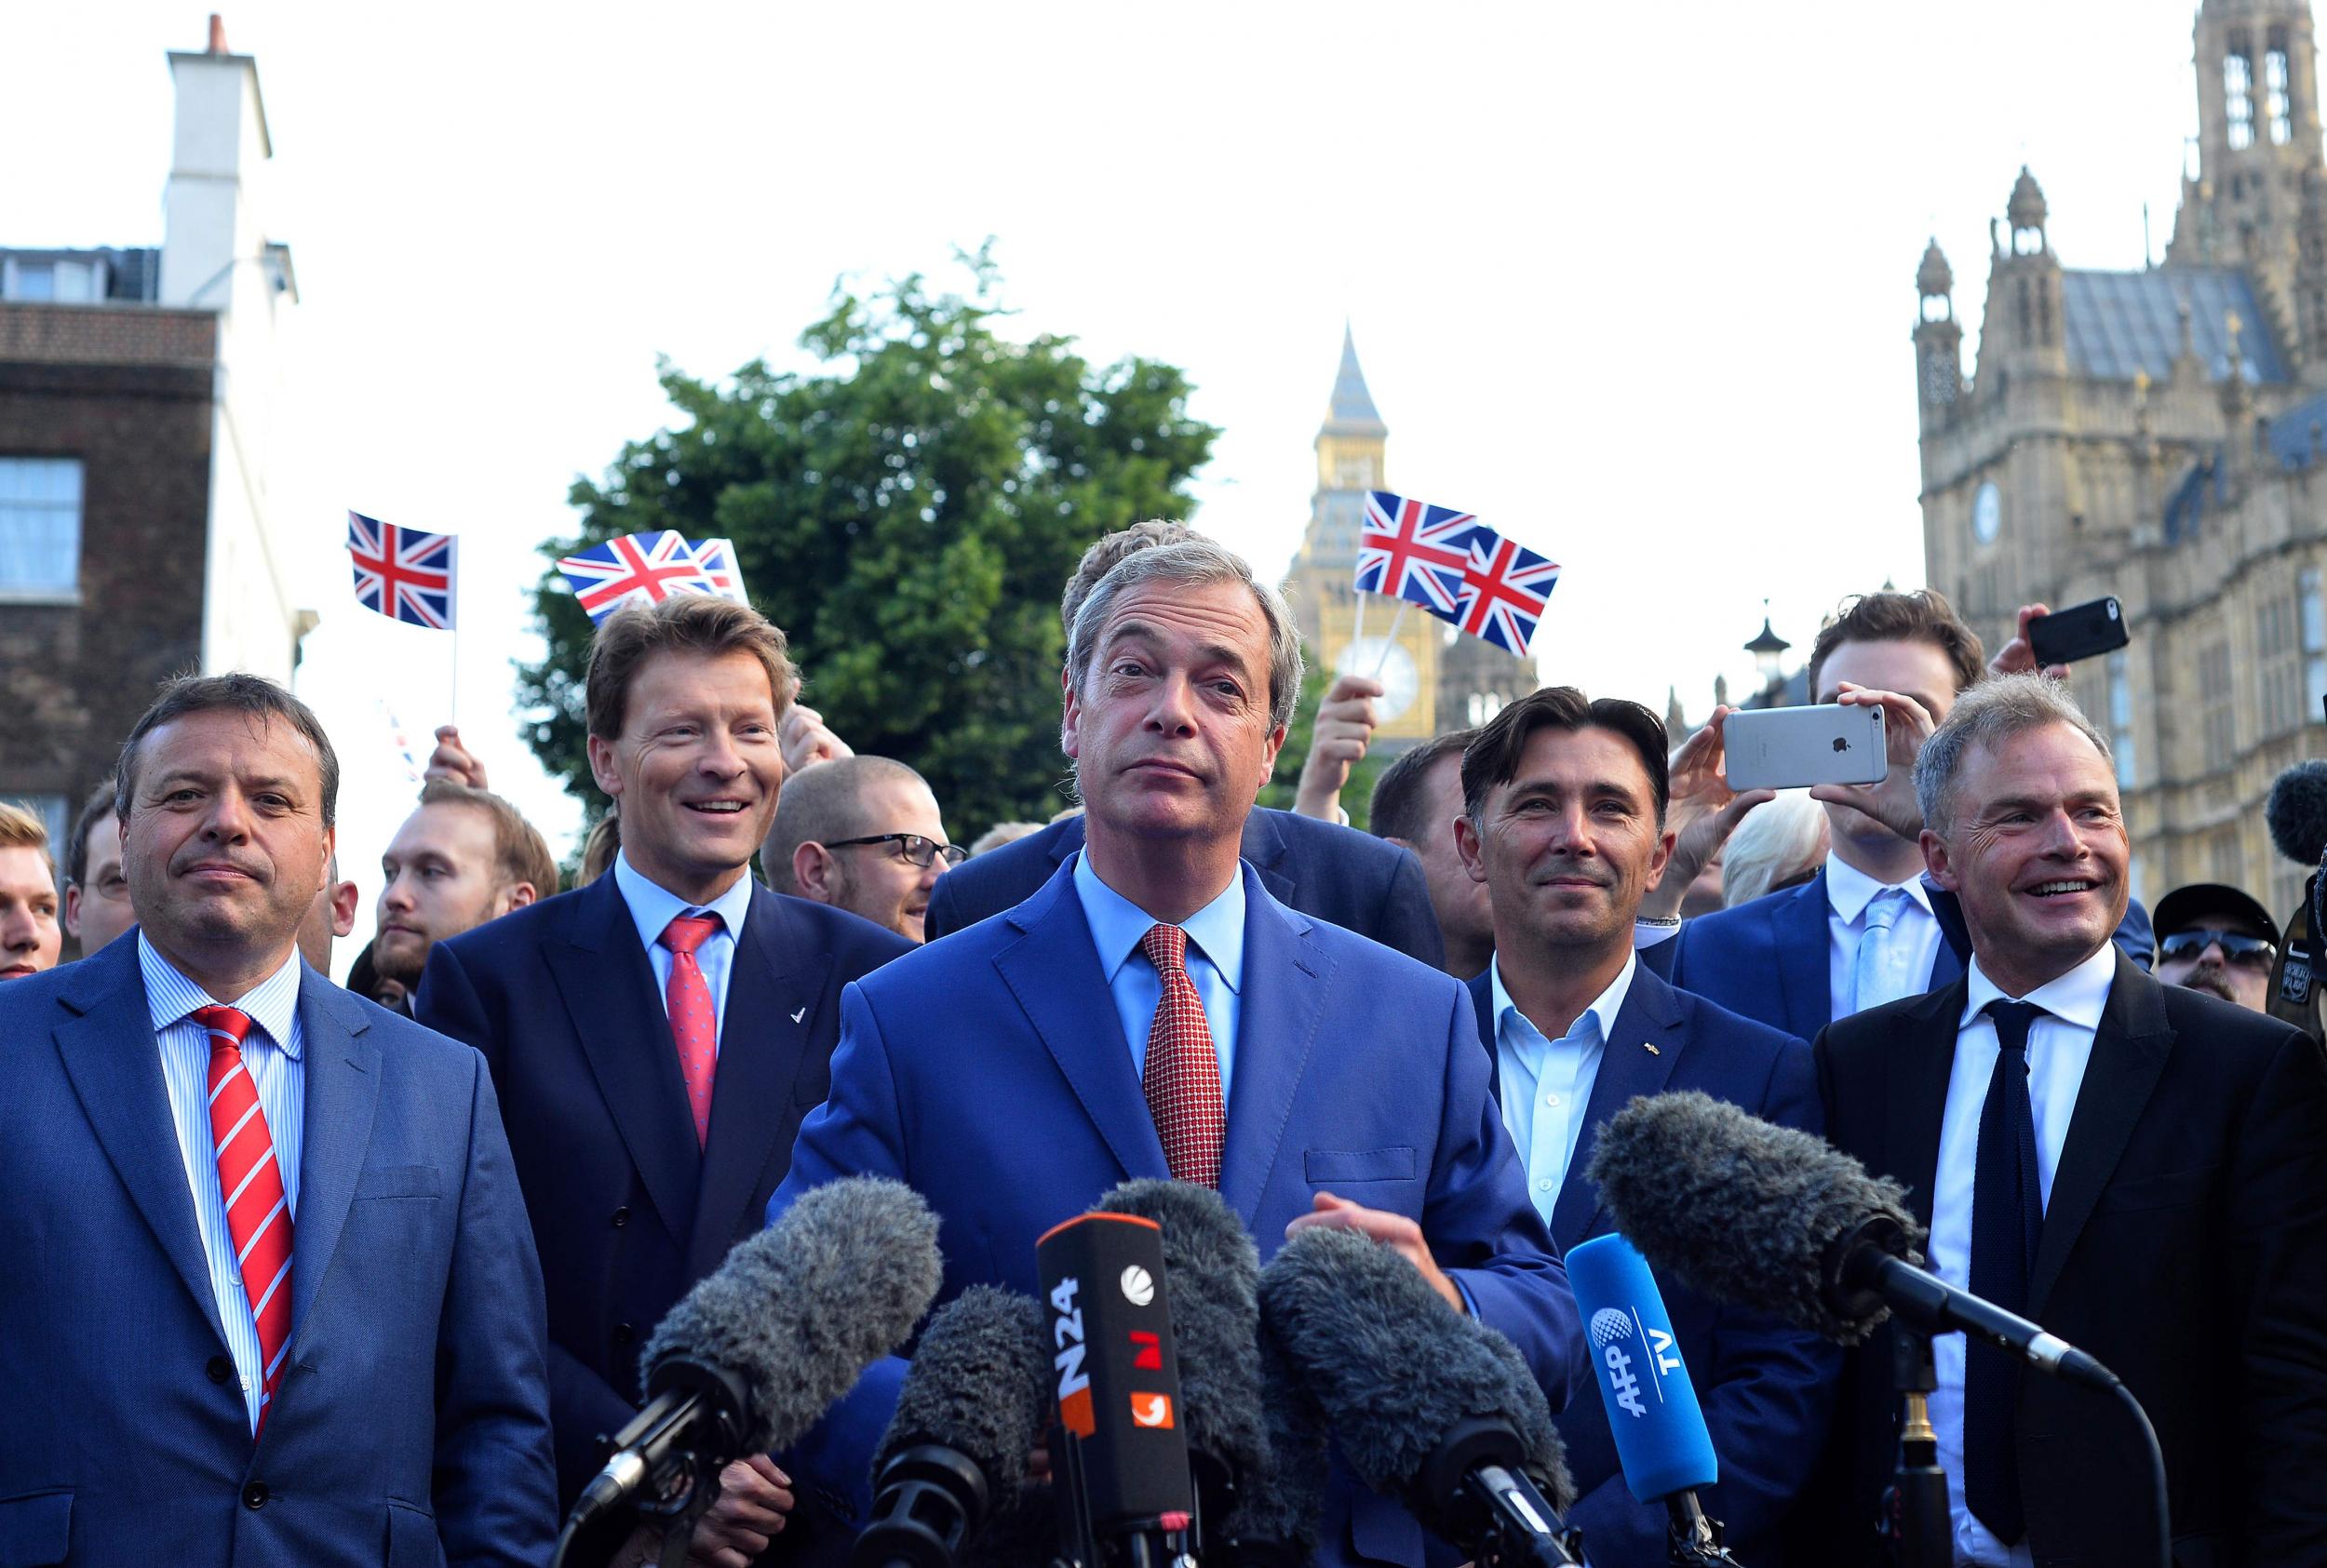 Nigel Farage (C) speaks during a news conference near the Houses of Parliament